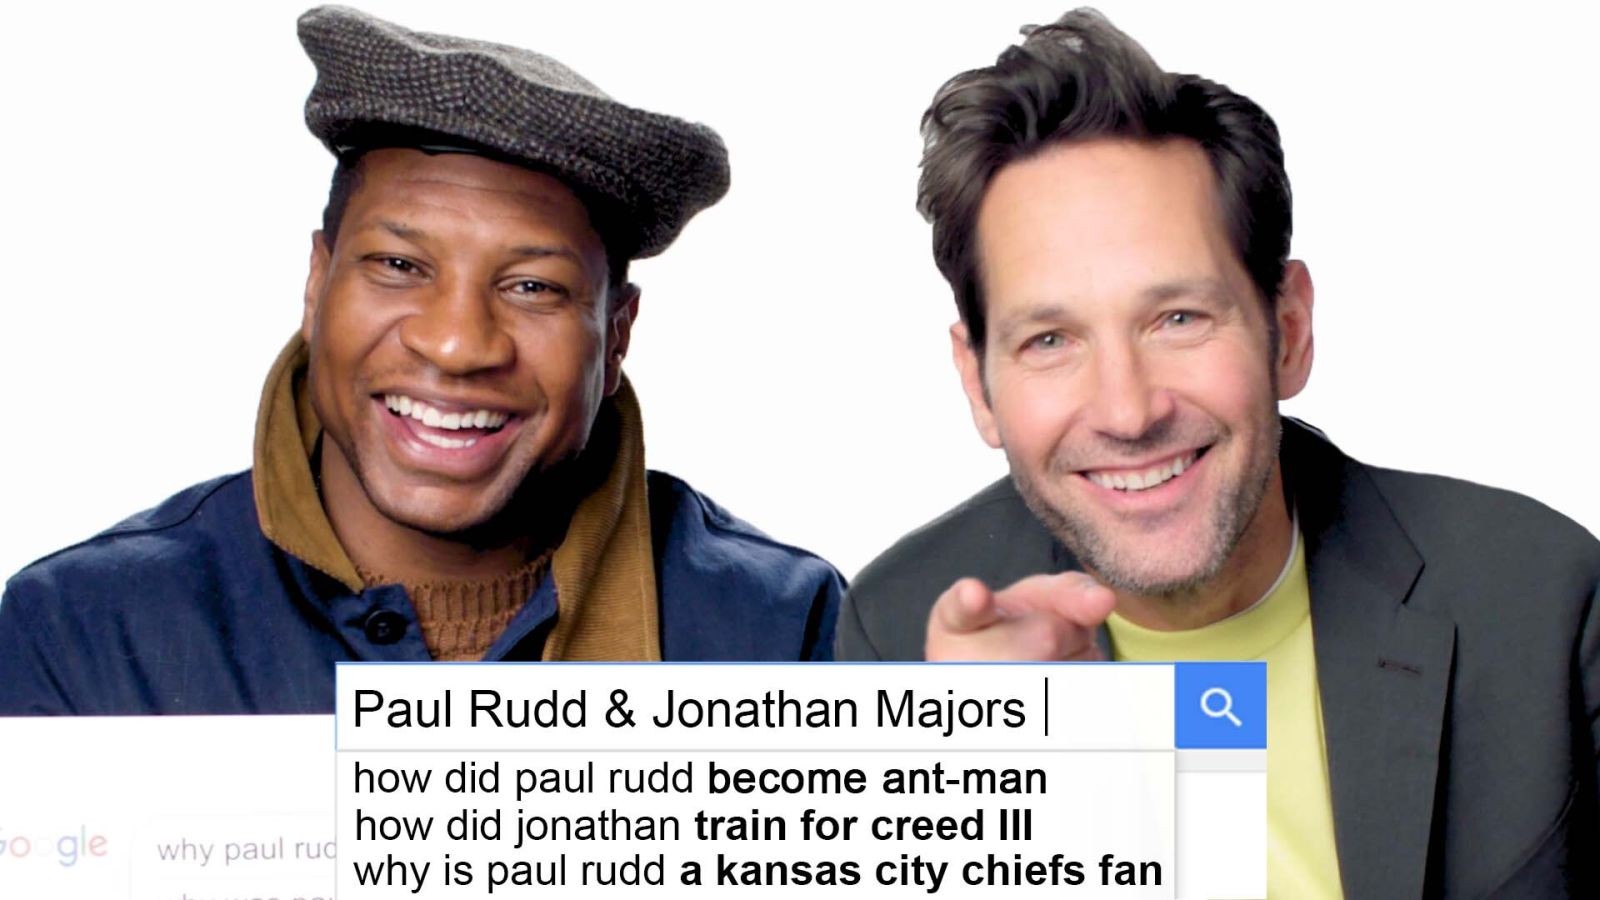 Paul Rudd & Jonathan Majors Answer the Web's Most Searched Questions